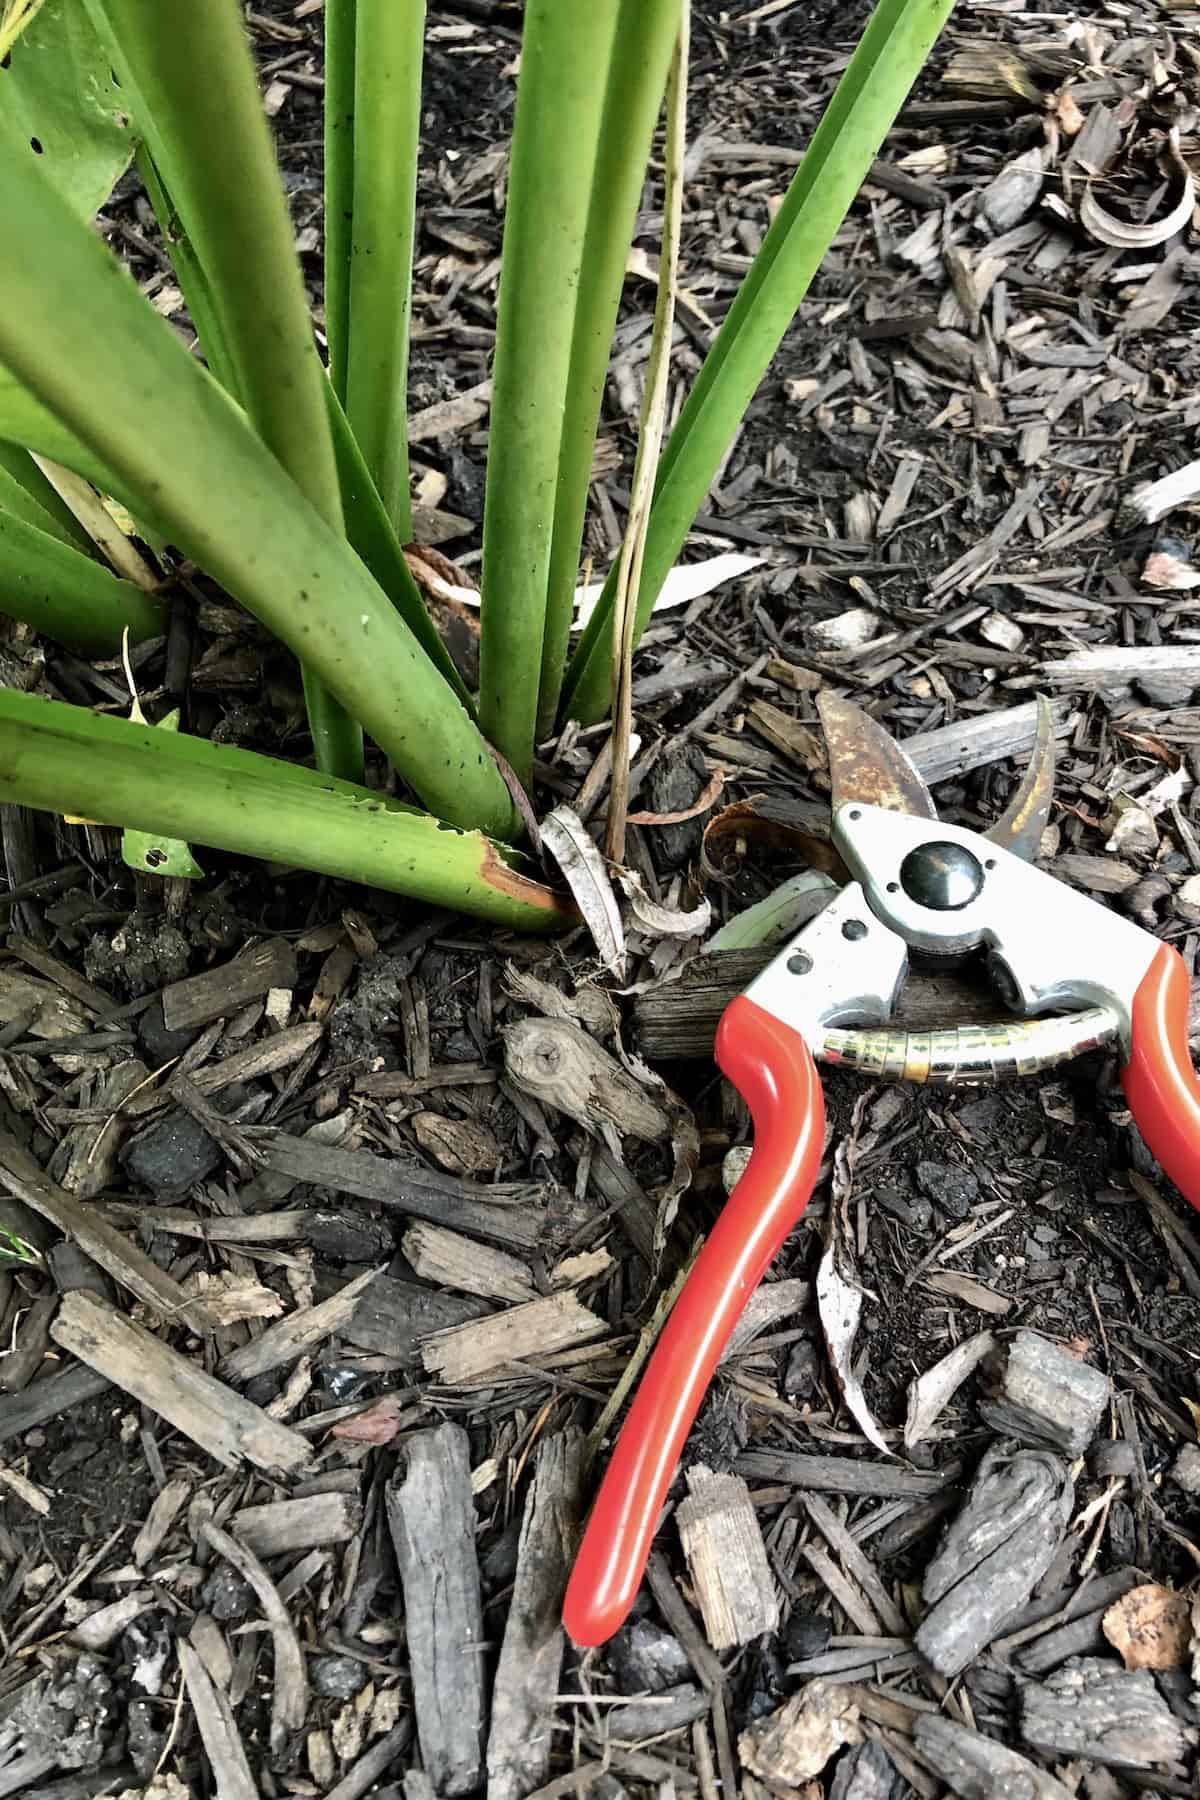 When to cut back hostas - photo shows pruning shears and hosta plant stems